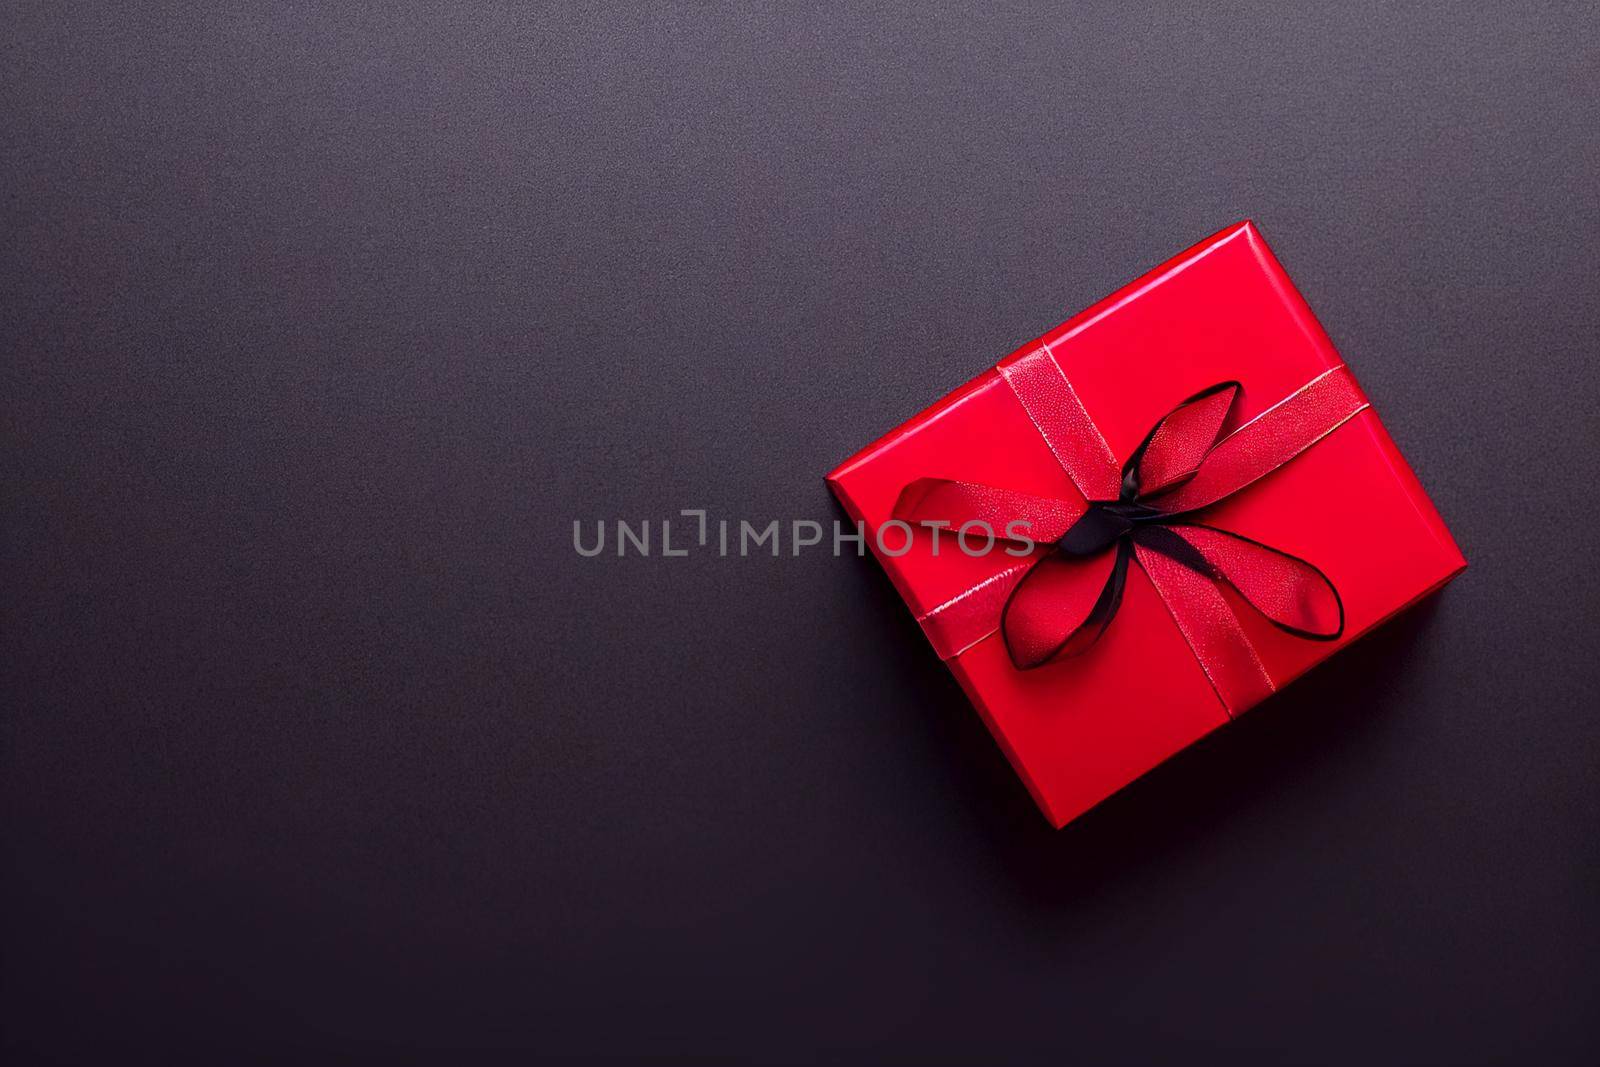 3D Render of red color gift box with black ribbon isolated against black background and Christmas decorations, top view design by FokasuArt